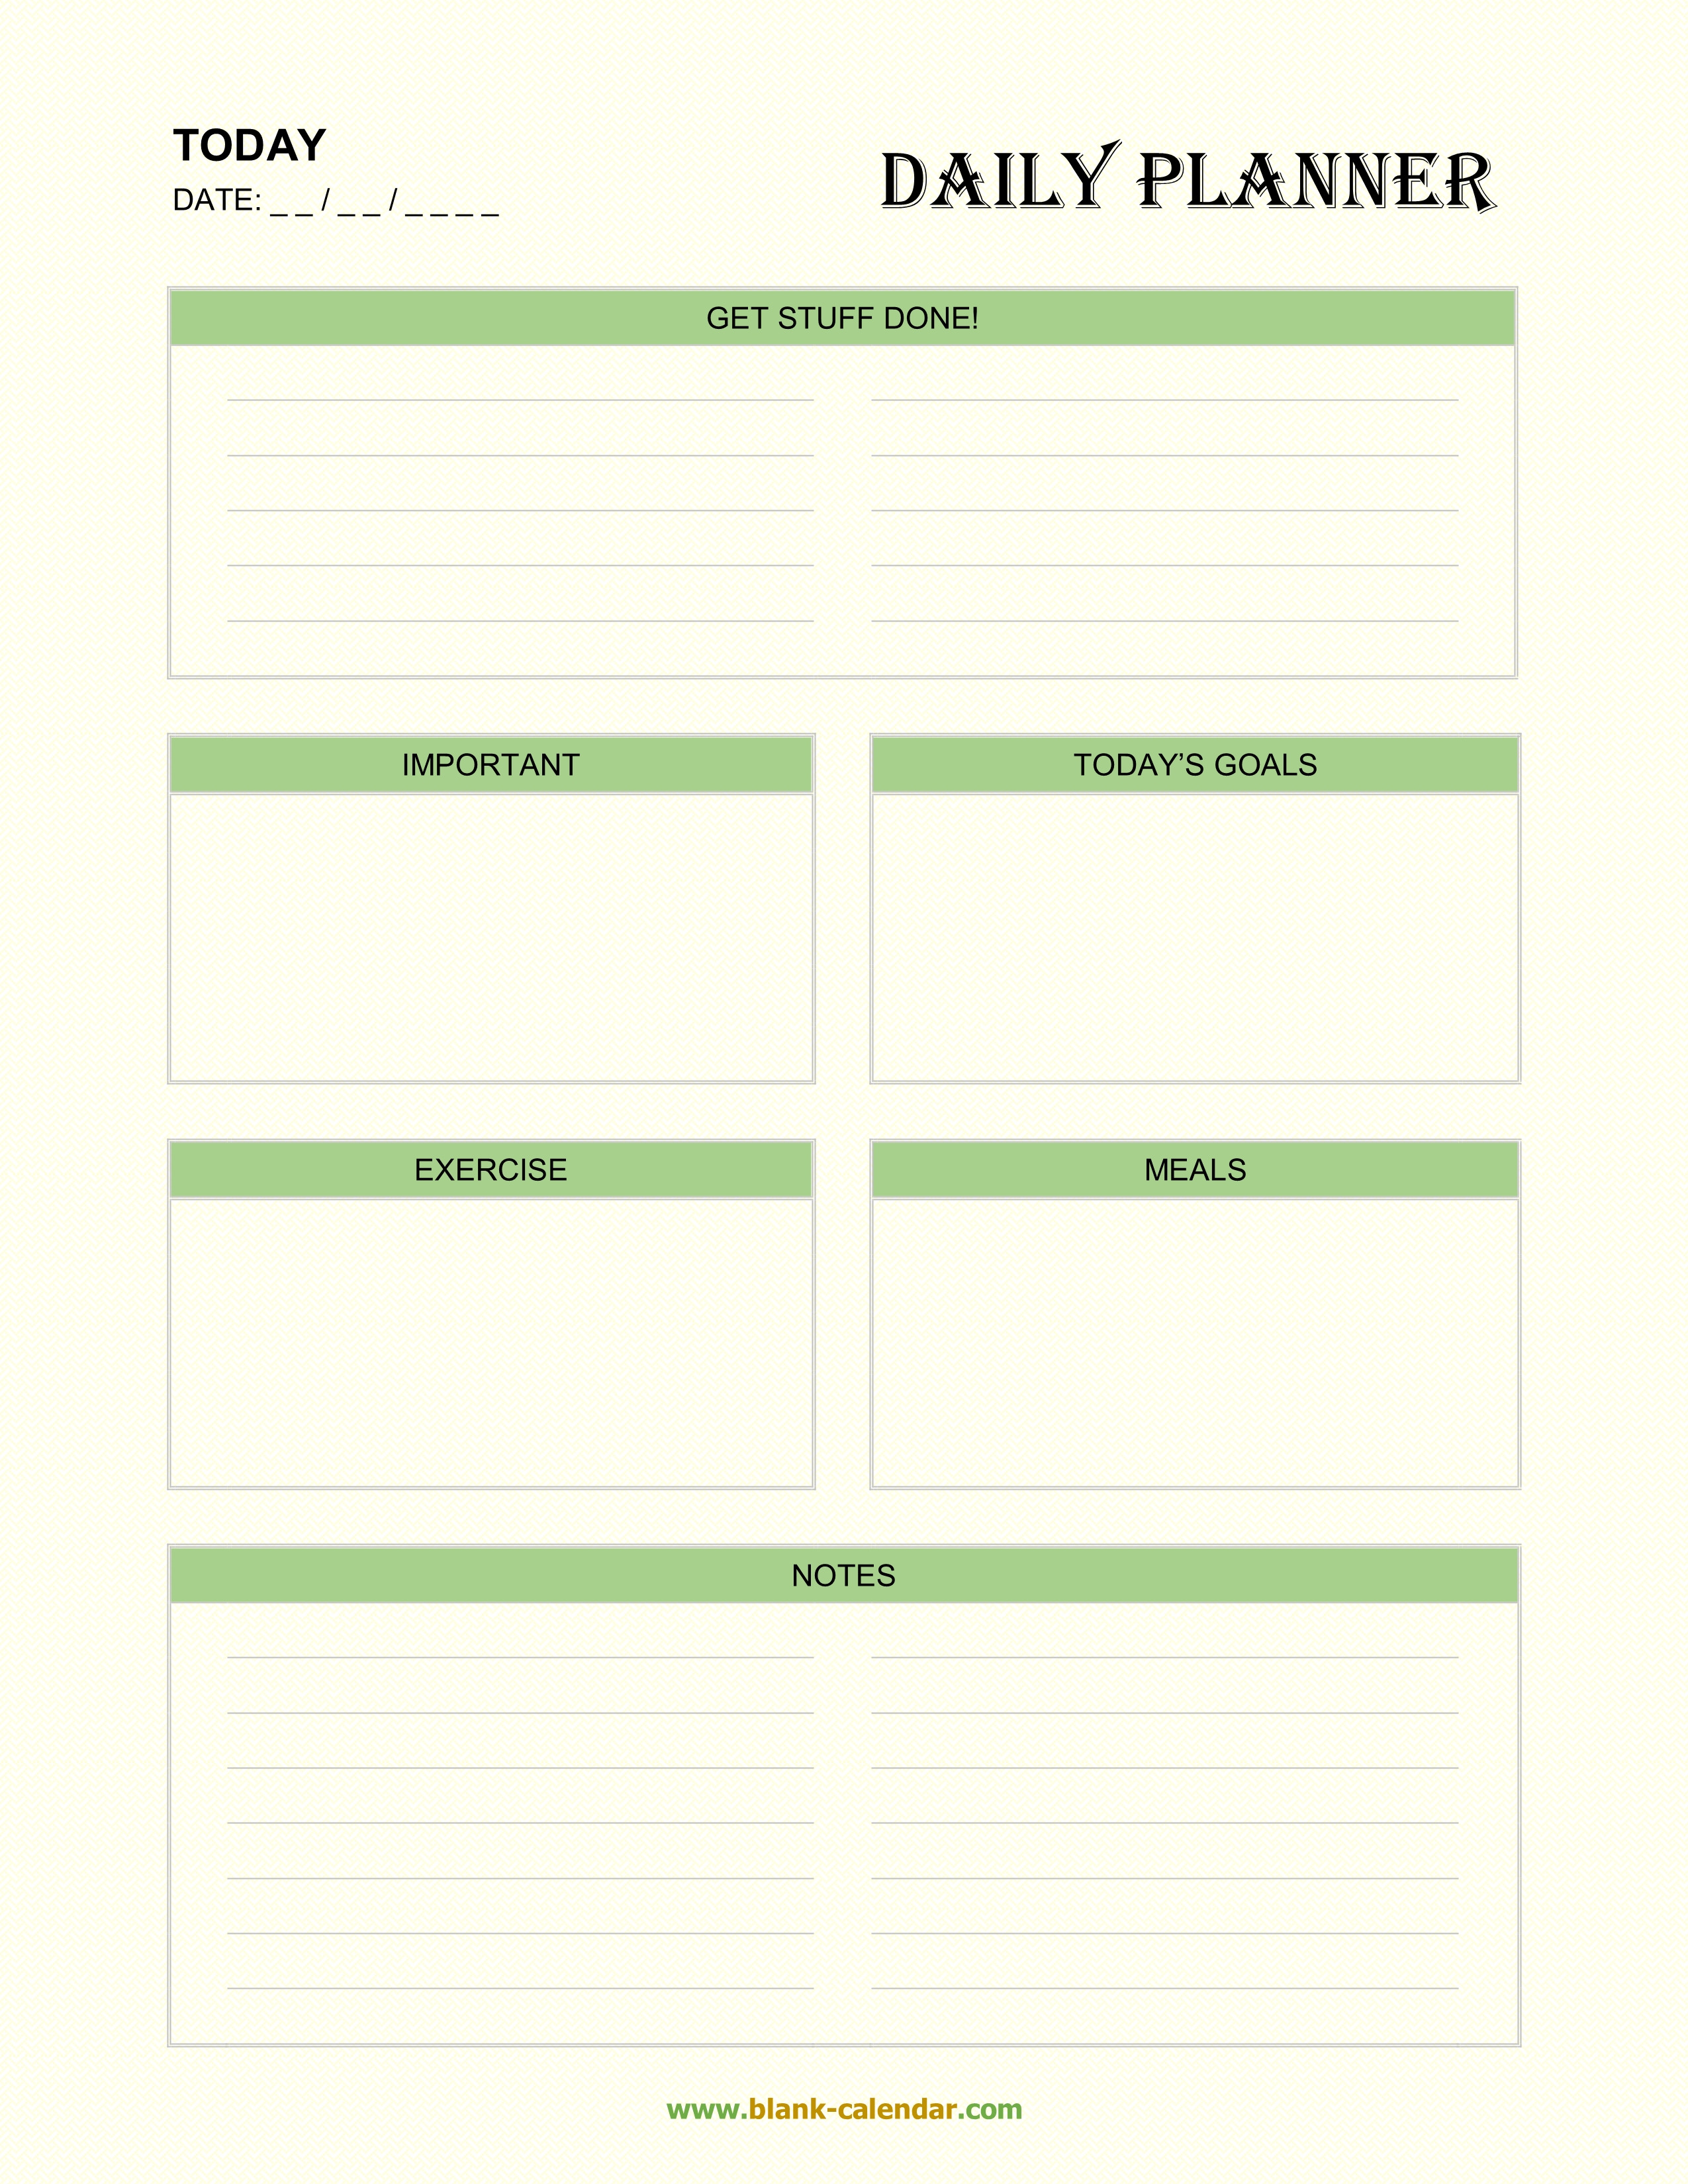 Daily Planner Excel Template from www.blank-calendar.com